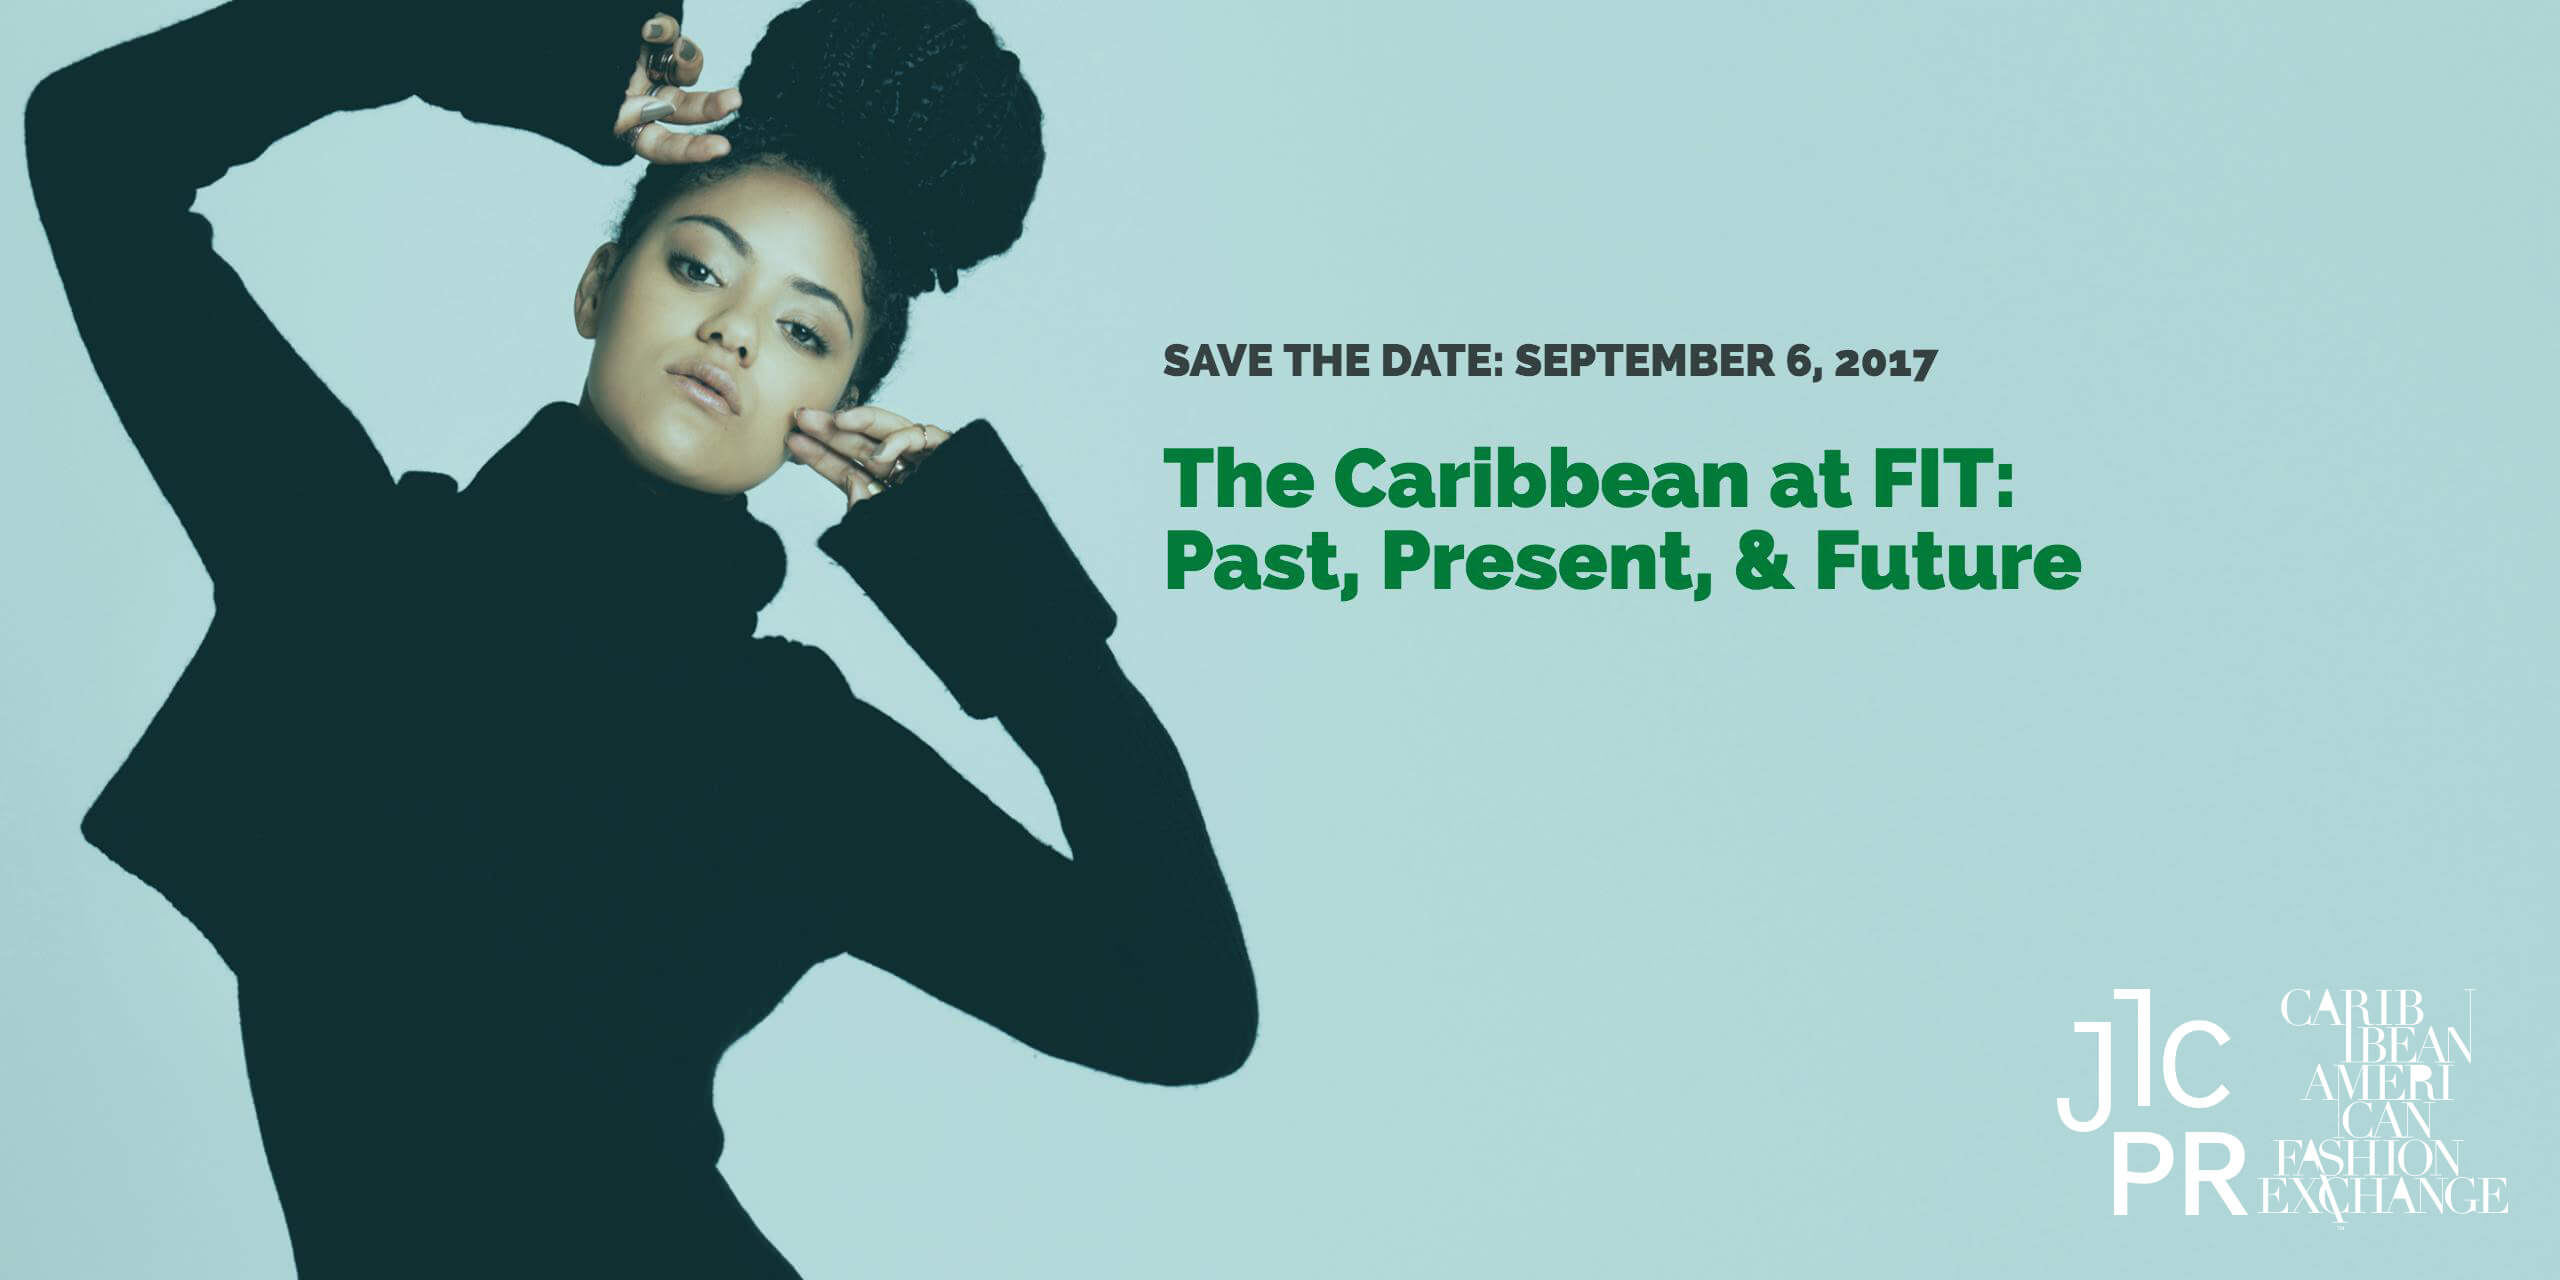 The Caribbean at FIT: Past, Present & Future